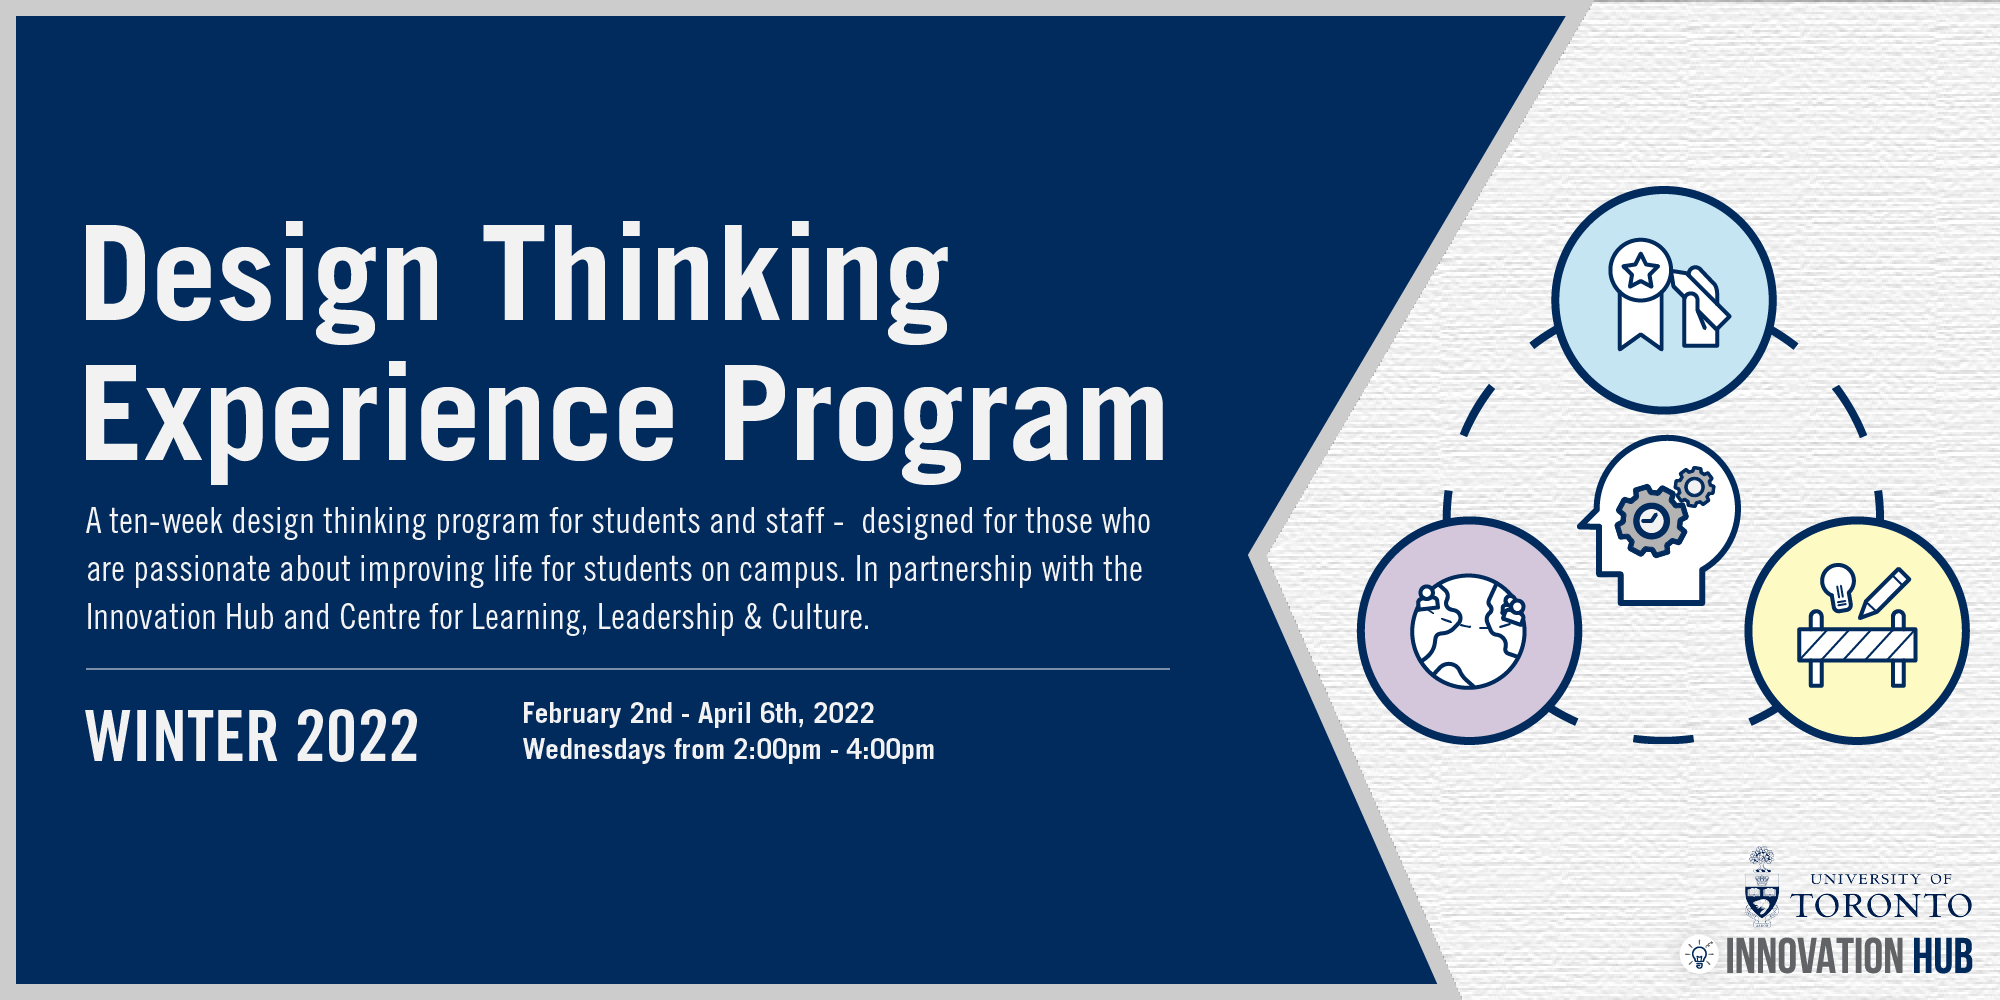 A blue and white graphic that reads 'The Design Thinking Experience Program' with colourful icons representing innovation and collaboration